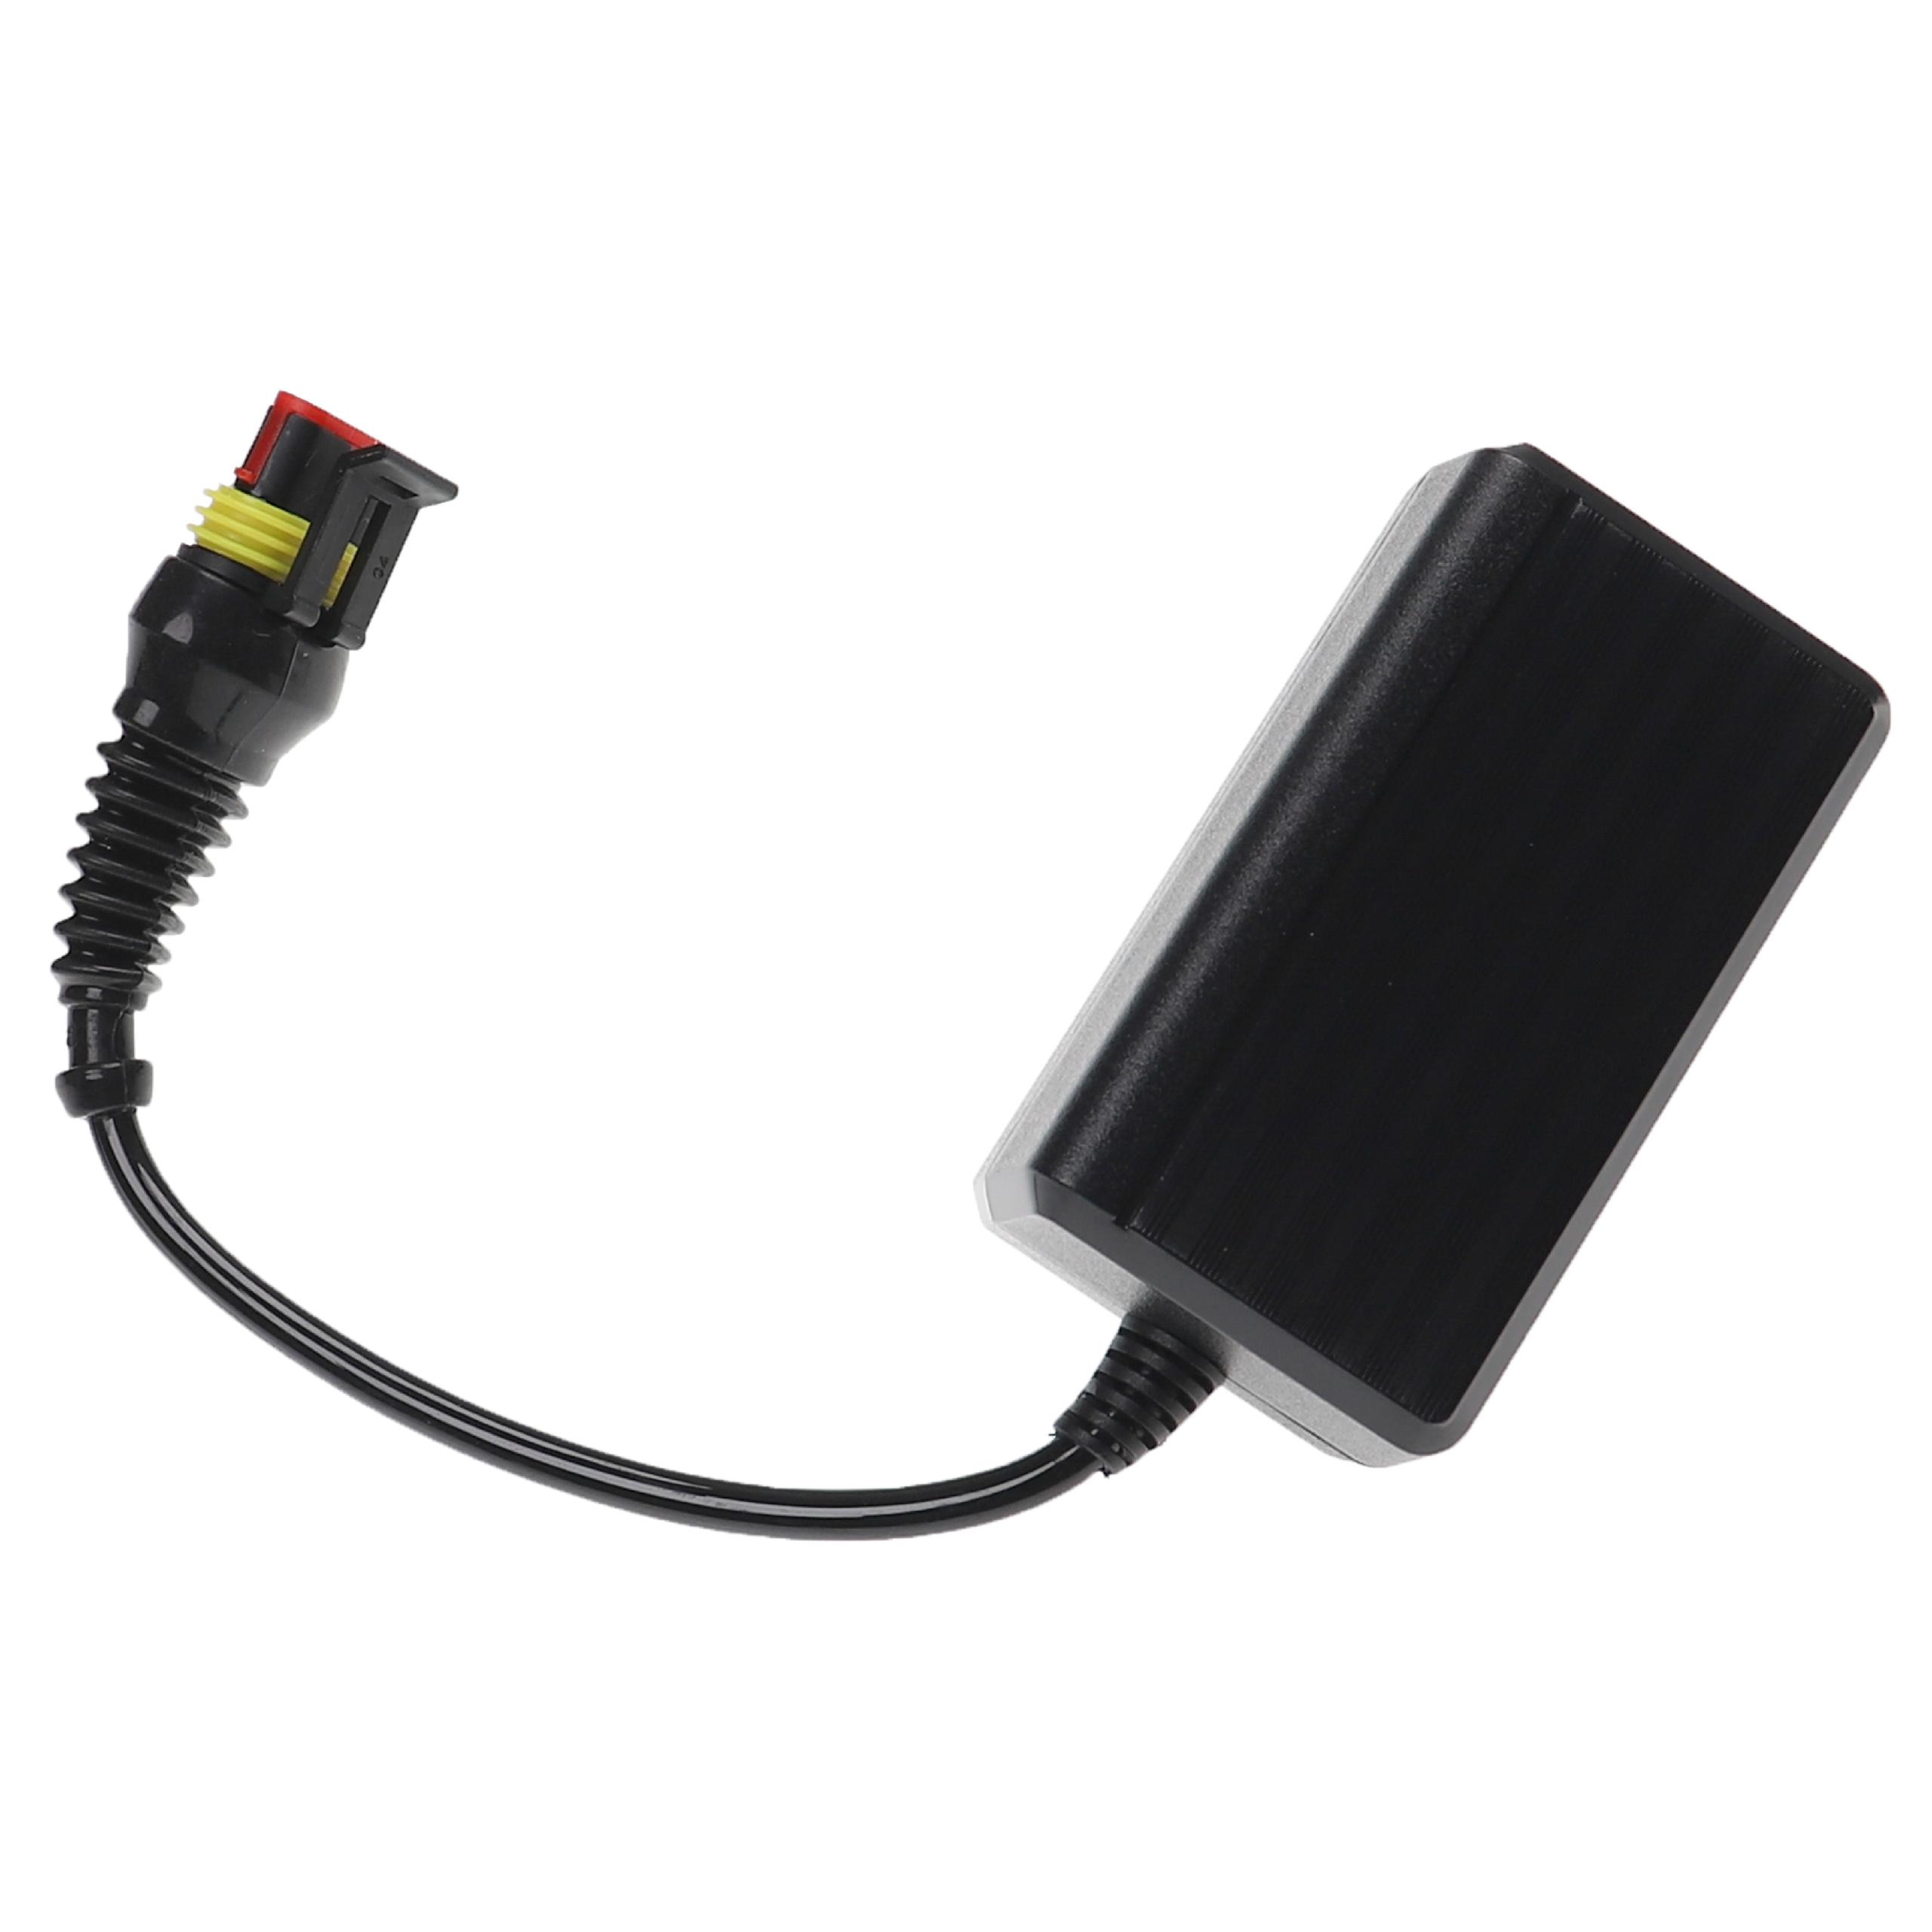 Mains Power Adapter replaces 5931636-01 for McCulloch Robot Lawn Mower Charging Station etc.